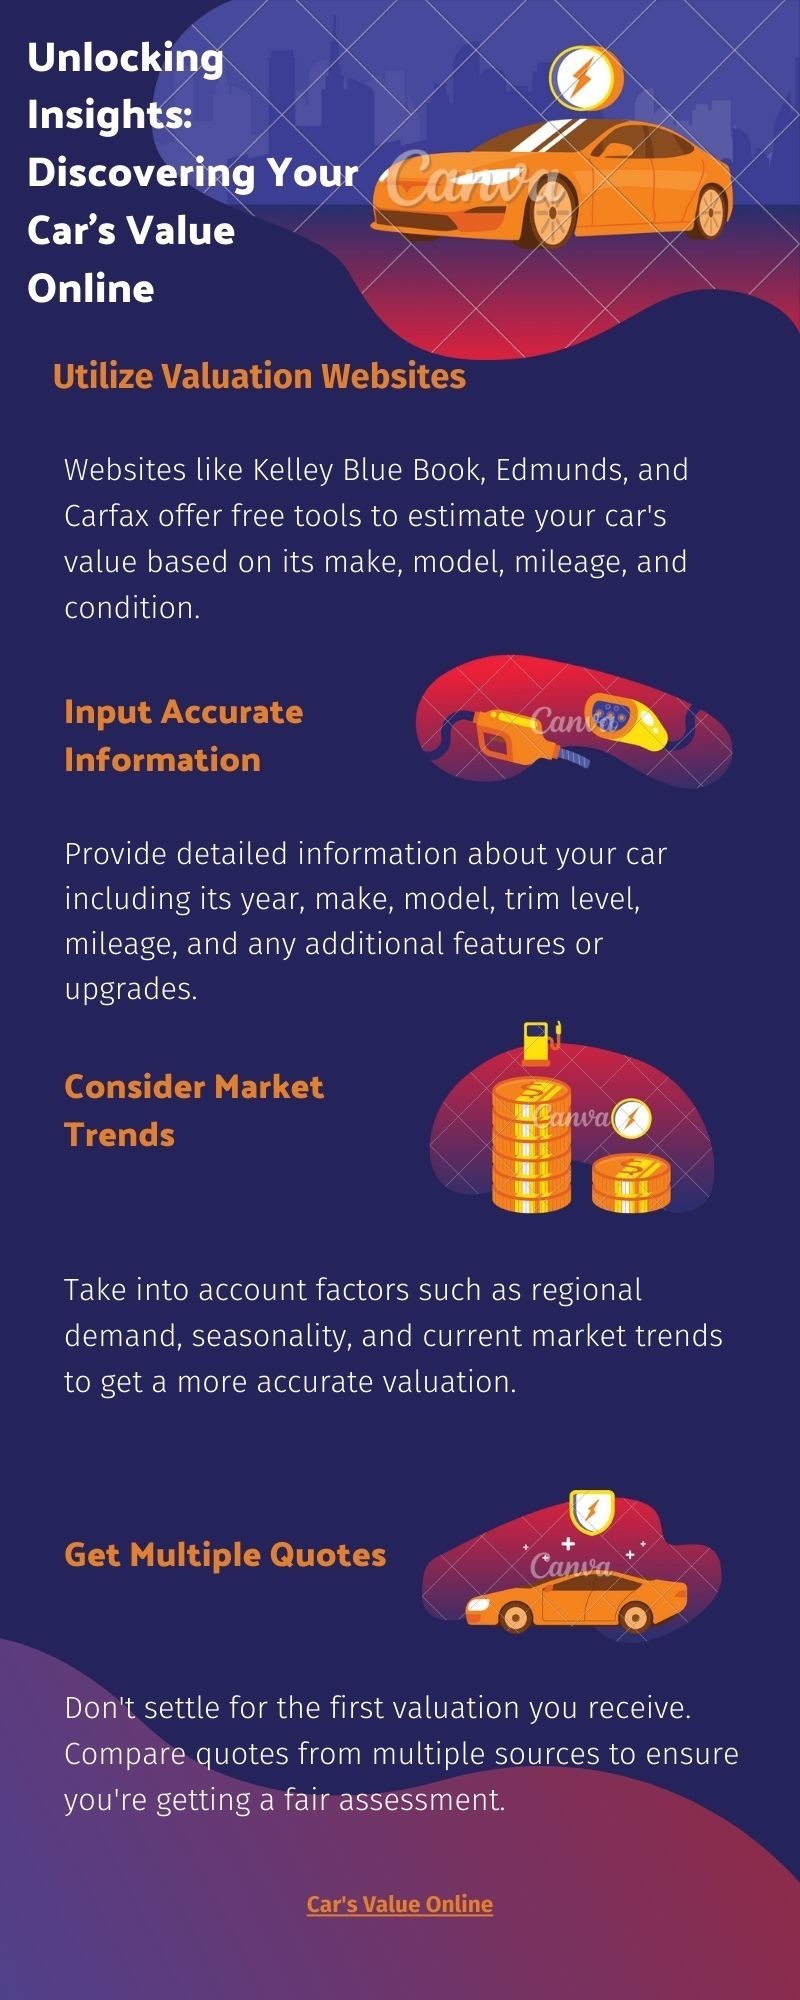 Unlocking Insights: Discovering Your Car's Value Online